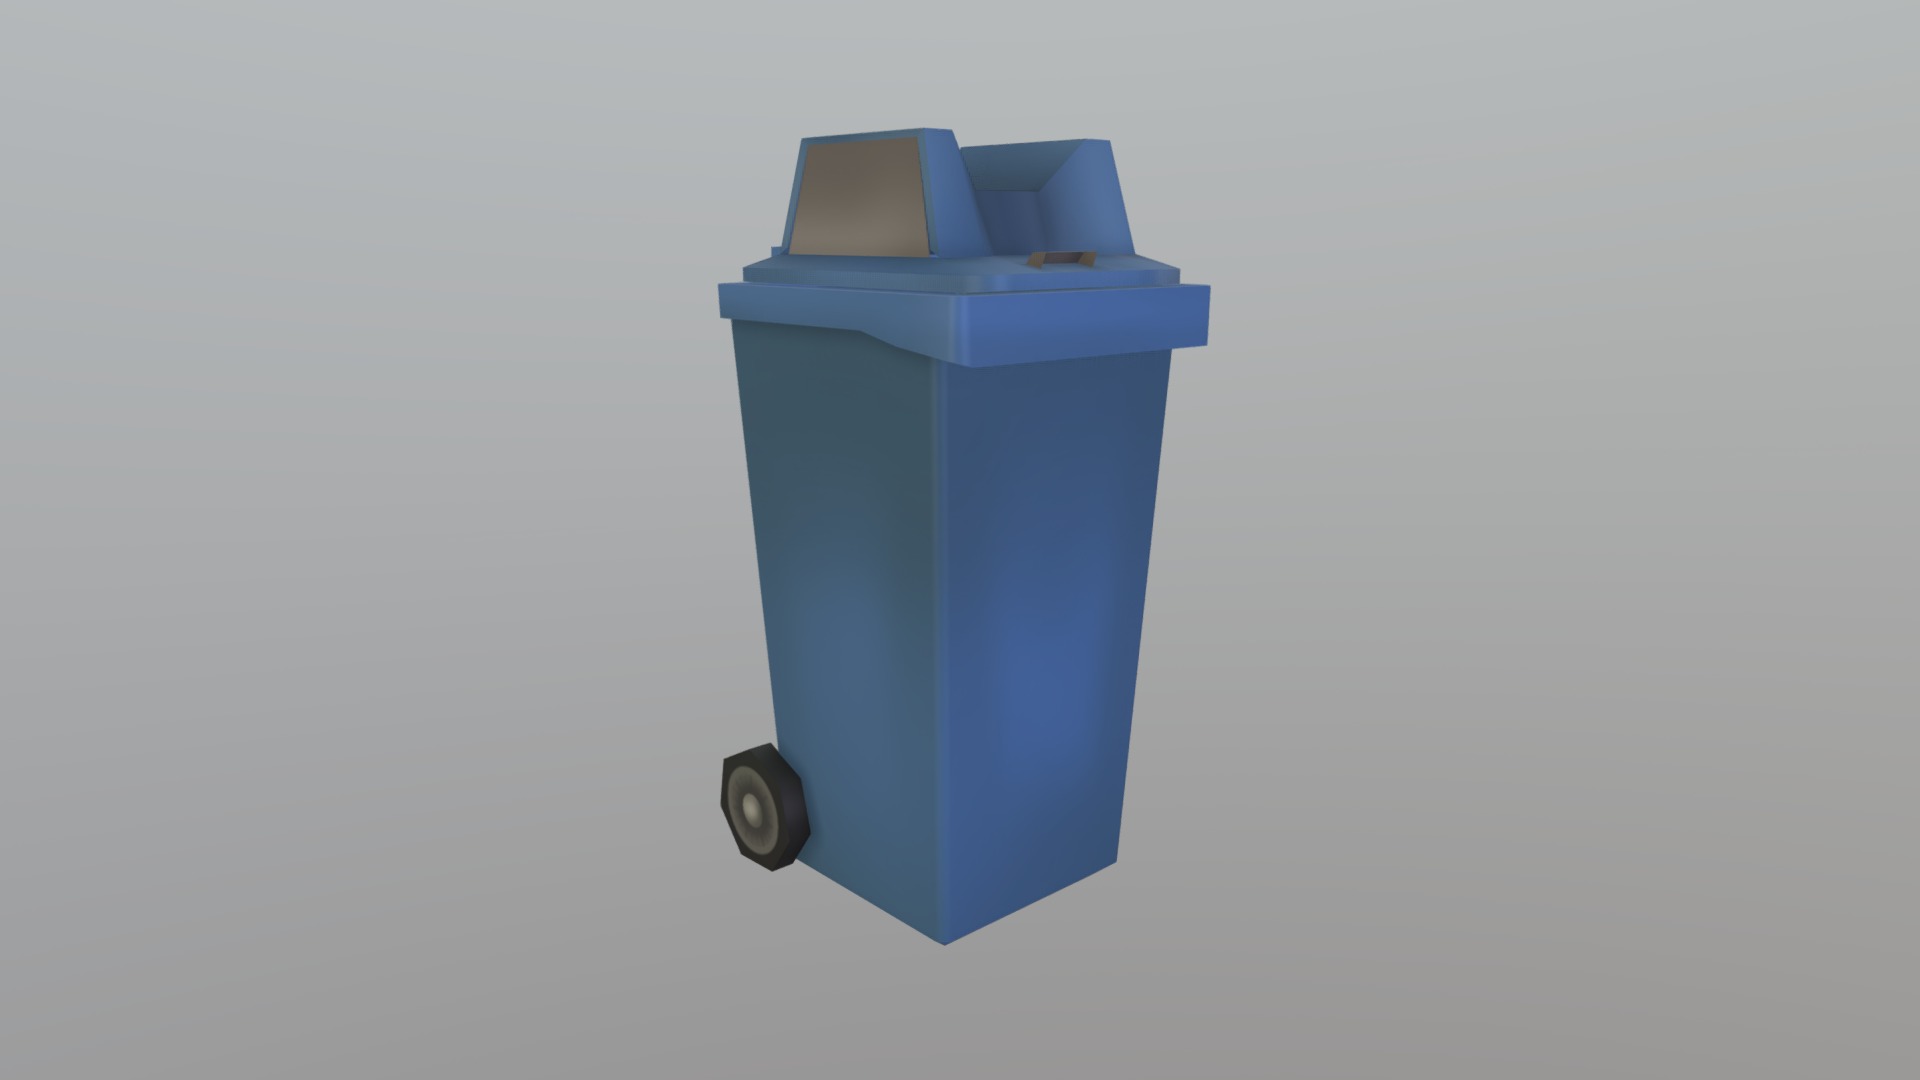 3D model Trash Can - This is a 3D model of the Trash Can. The 3D model is about a blue and white toy.